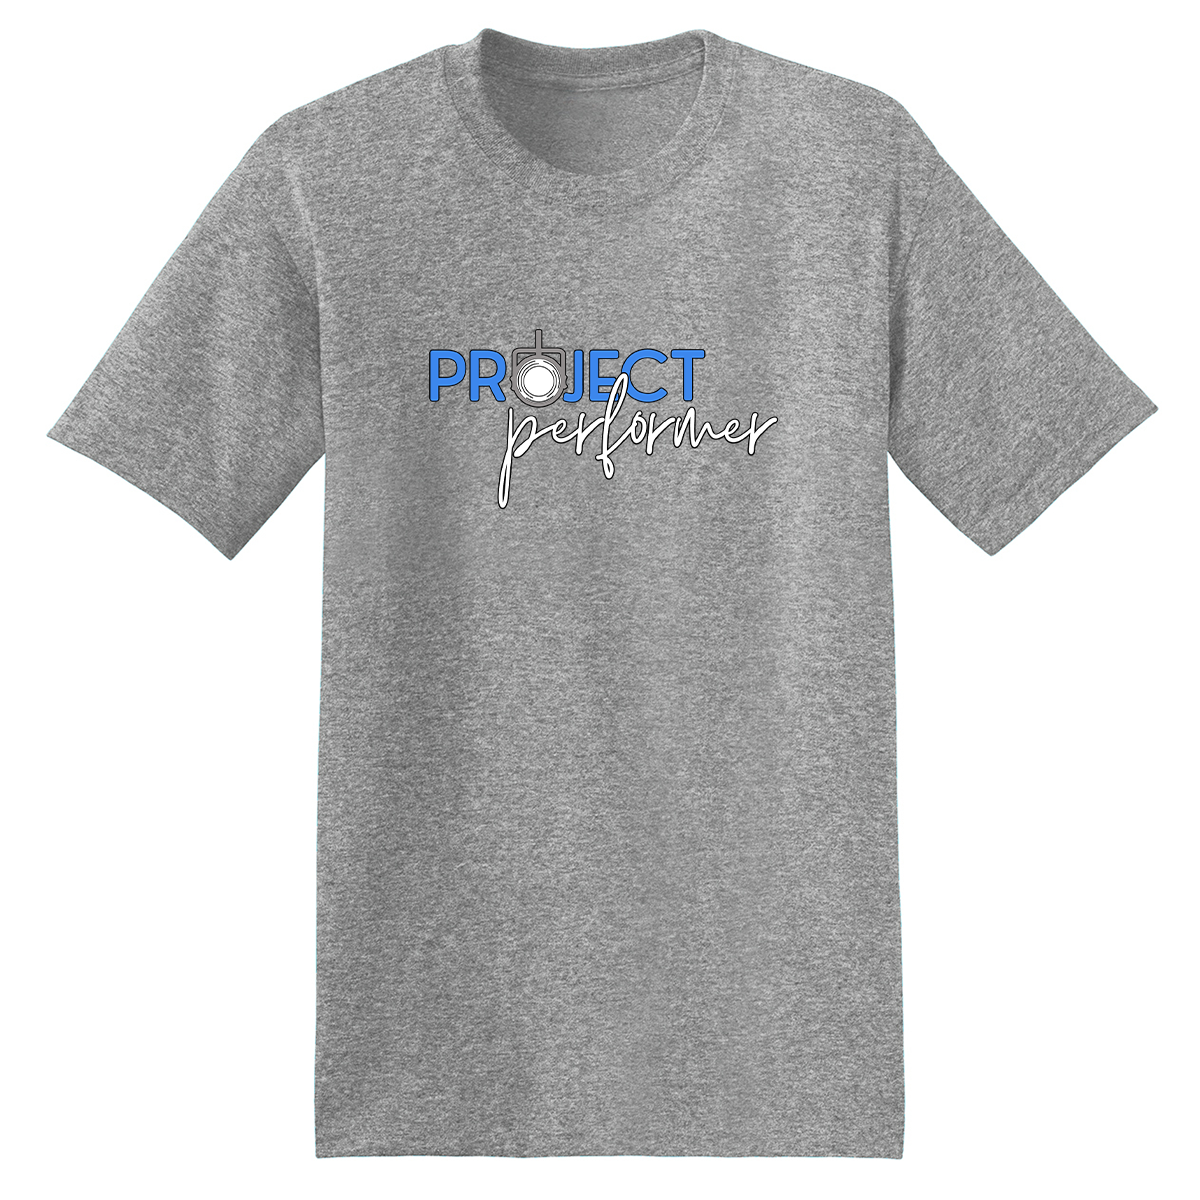 Project Performer T-Shirt